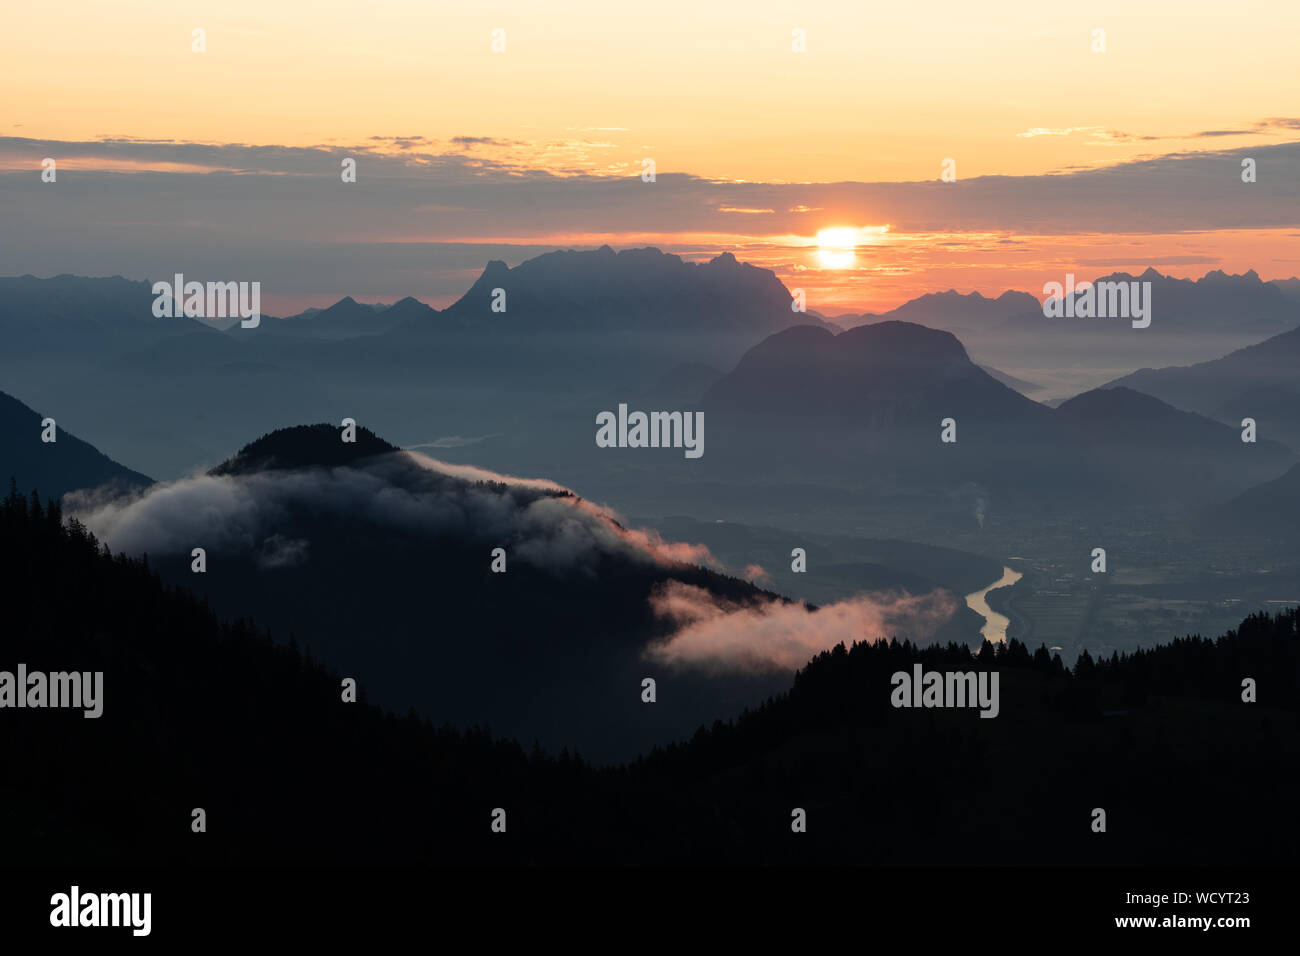 Sunrise over the tyrol alm high over the mountains scenery with clouds and river Stock Photo